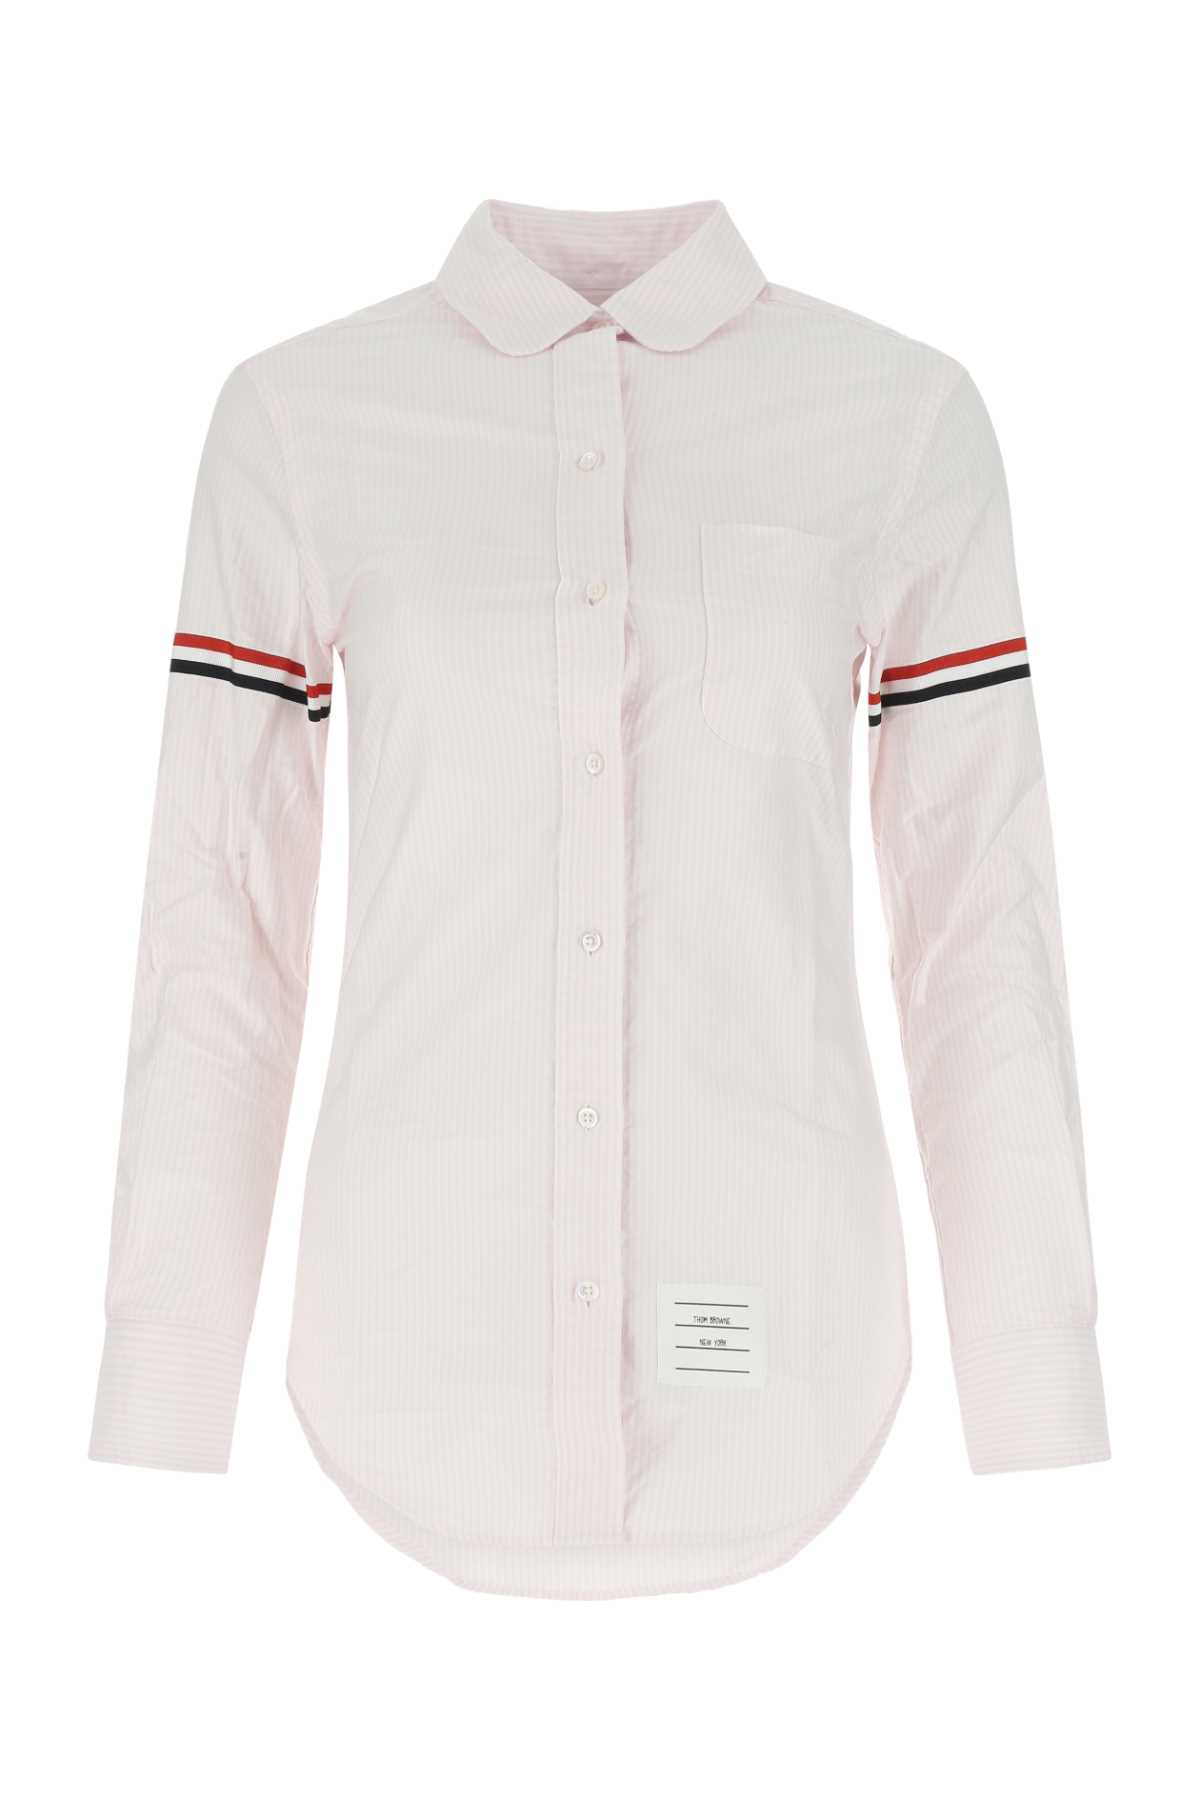 Thom Browne Embroidered Cotton Shirt In Neutral